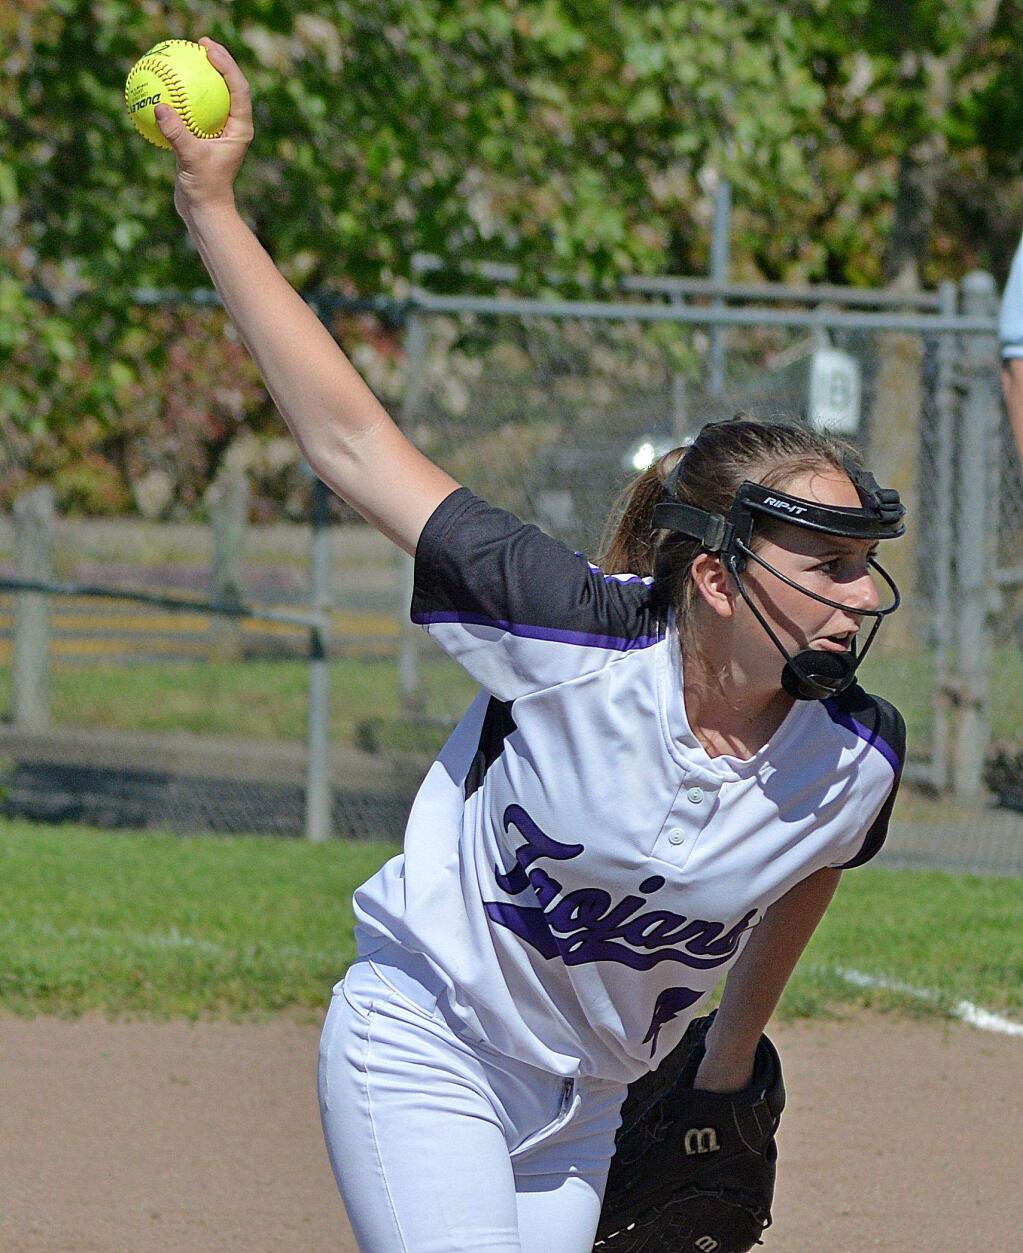 SUMNER FOWLER PHOTOS/FOR THE ARGUS-COURIERPetaluma's Mandy O'Keefe (above) and Casa Grande's Katie Machado hooked up in a masterful pitching duel won by O'Keefe's T-Girls, 1-0.